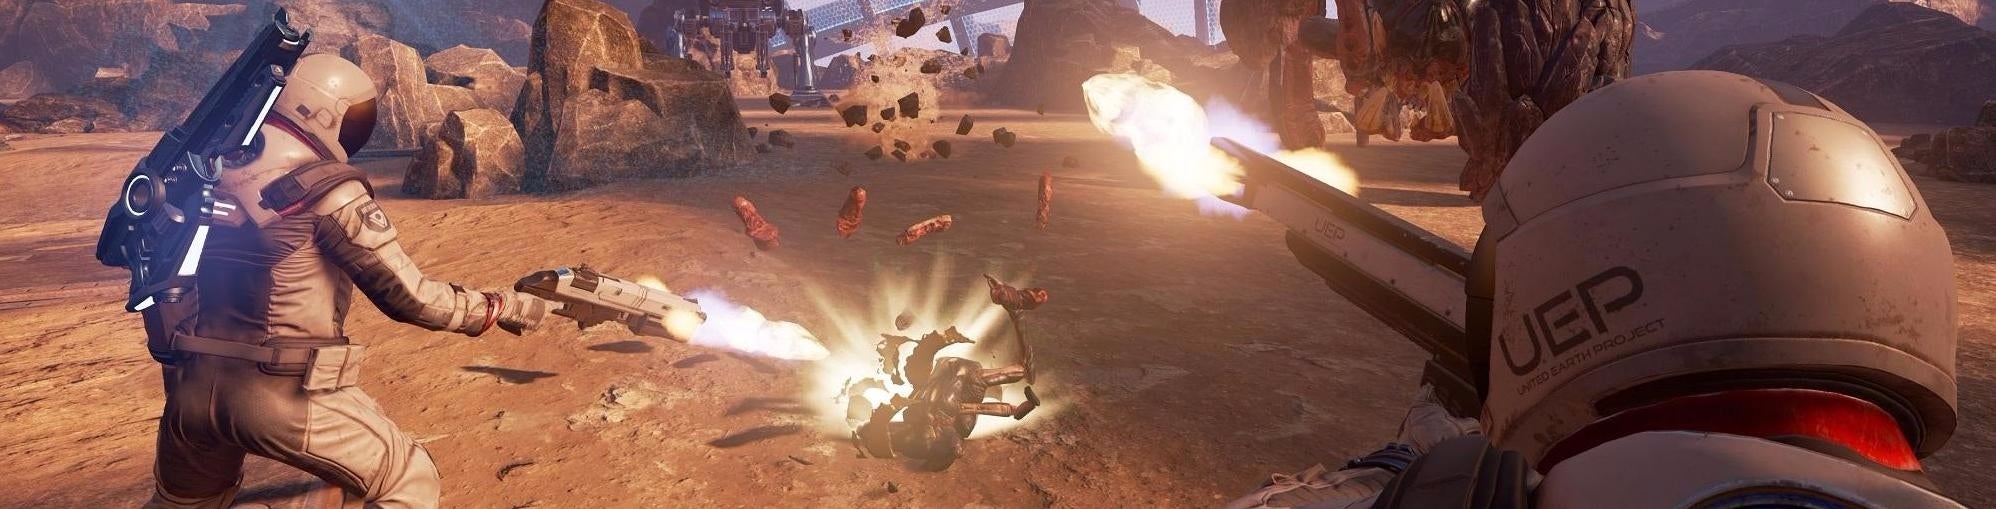 Image for Watch: Ian aims to stream 90 minutes of Farpoint gameplay